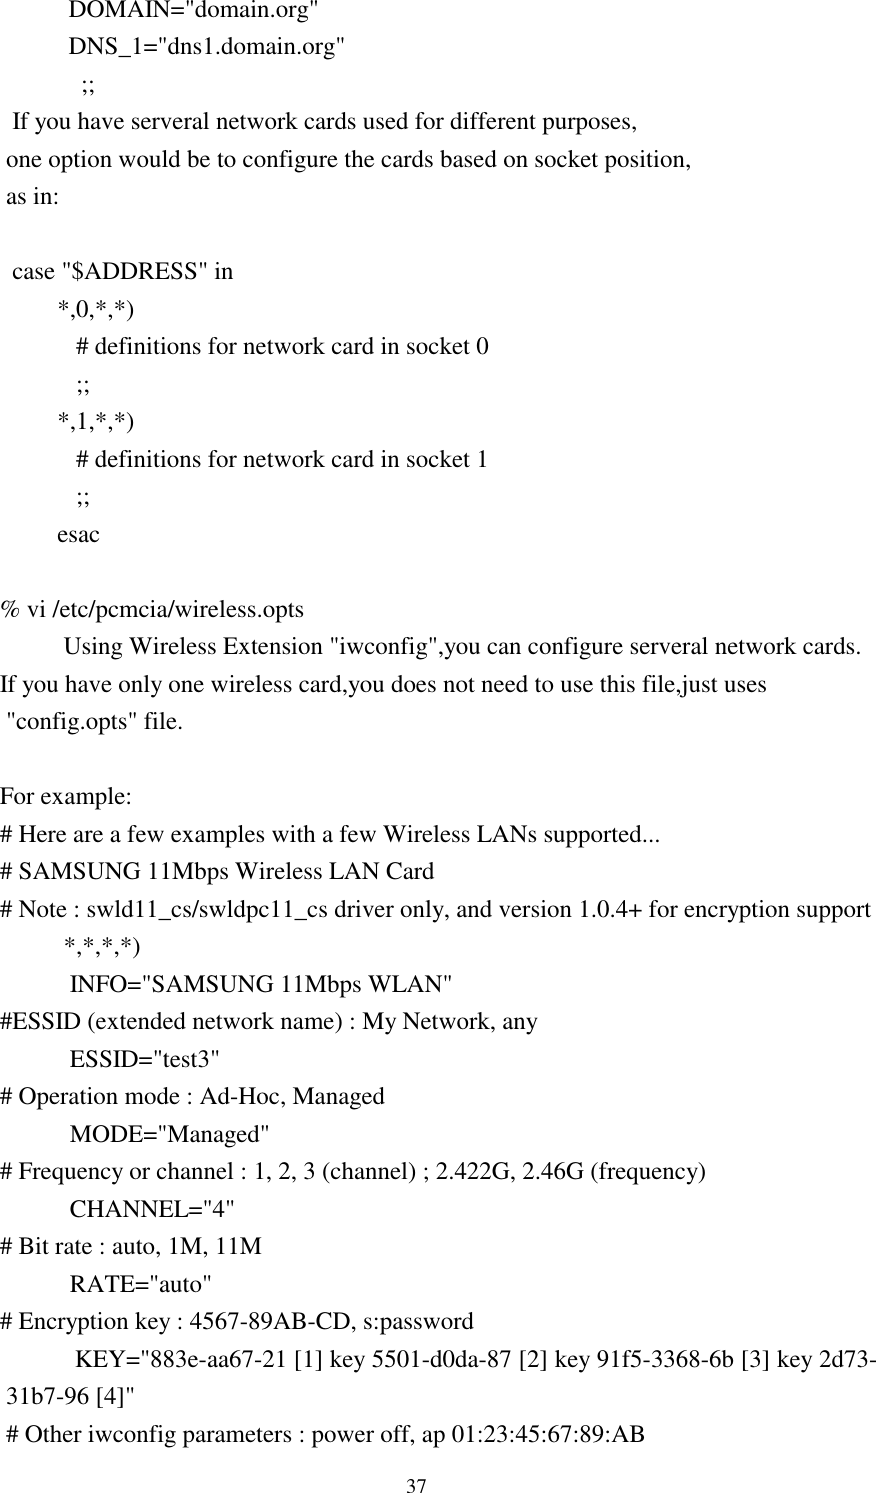  37                   DOMAIN=&quot;domain.org&quot;                   DNS_1=&quot;dns1.domain.org&quot;                 ;;          If you have serveral network cards used for different purposes,         one option would be to configure the cards based on socket position,         as in:           case &quot;$ADDRESS&quot; in     *,0,*,*)        # definitions for network card in socket 0        ;;     *,1,*,*)        # definitions for network card in socket 1        ;;     esac         % vi /etc/pcmcia/wireless.opts      Using Wireless Extension &quot;iwconfig&quot;,you can configure serveral network cards.        If you have only one wireless card,you does not need to use this file,just uses         &quot;config.opts&quot; file.                For example:           # Here are a few examples with a few Wireless LANs supported...        # SAMSUNG 11Mbps Wireless LAN Card      # Note : swld11_cs/swldpc11_cs driver only, and version 1.0.4+ for encryption support      *,*,*,*)       INFO=&quot;SAMSUNG 11Mbps WLAN&quot;        #ESSID (extended network name) : My Network, any       ESSID=&quot;test3&quot;        # Operation mode : Ad-Hoc, Managed       MODE=&quot;Managed&quot;        # Frequency or channel : 1, 2, 3 (channel) ; 2.422G, 2.46G (frequency)       CHANNEL=&quot;4&quot;        # Bit rate : auto, 1M, 11M       RATE=&quot;auto&quot;        # Encryption key : 4567-89AB-CD, s:password              KEY=&quot;883e-aa67-21 [1] key 5501-d0da-87 [2] key 91f5-3368-6b [3] key 2d73-31b7-96 [4]&quot;         # Other iwconfig parameters : power off, ap 01:23:45:67:89:AB 